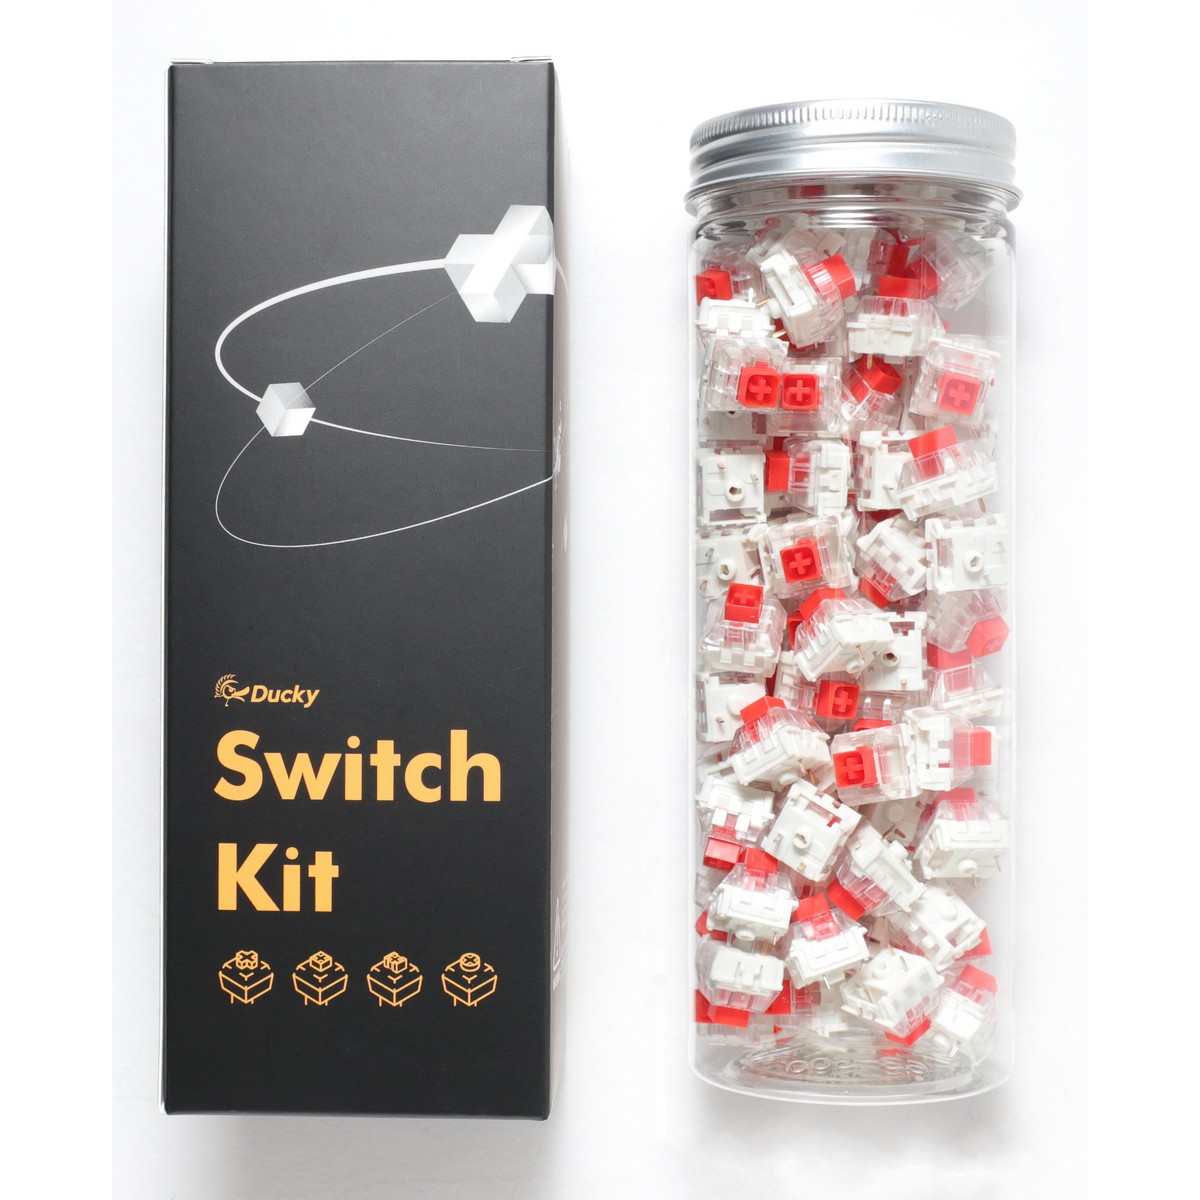 Ducky - Ducky Switch Kit Kailh Box Red 110 Pcs